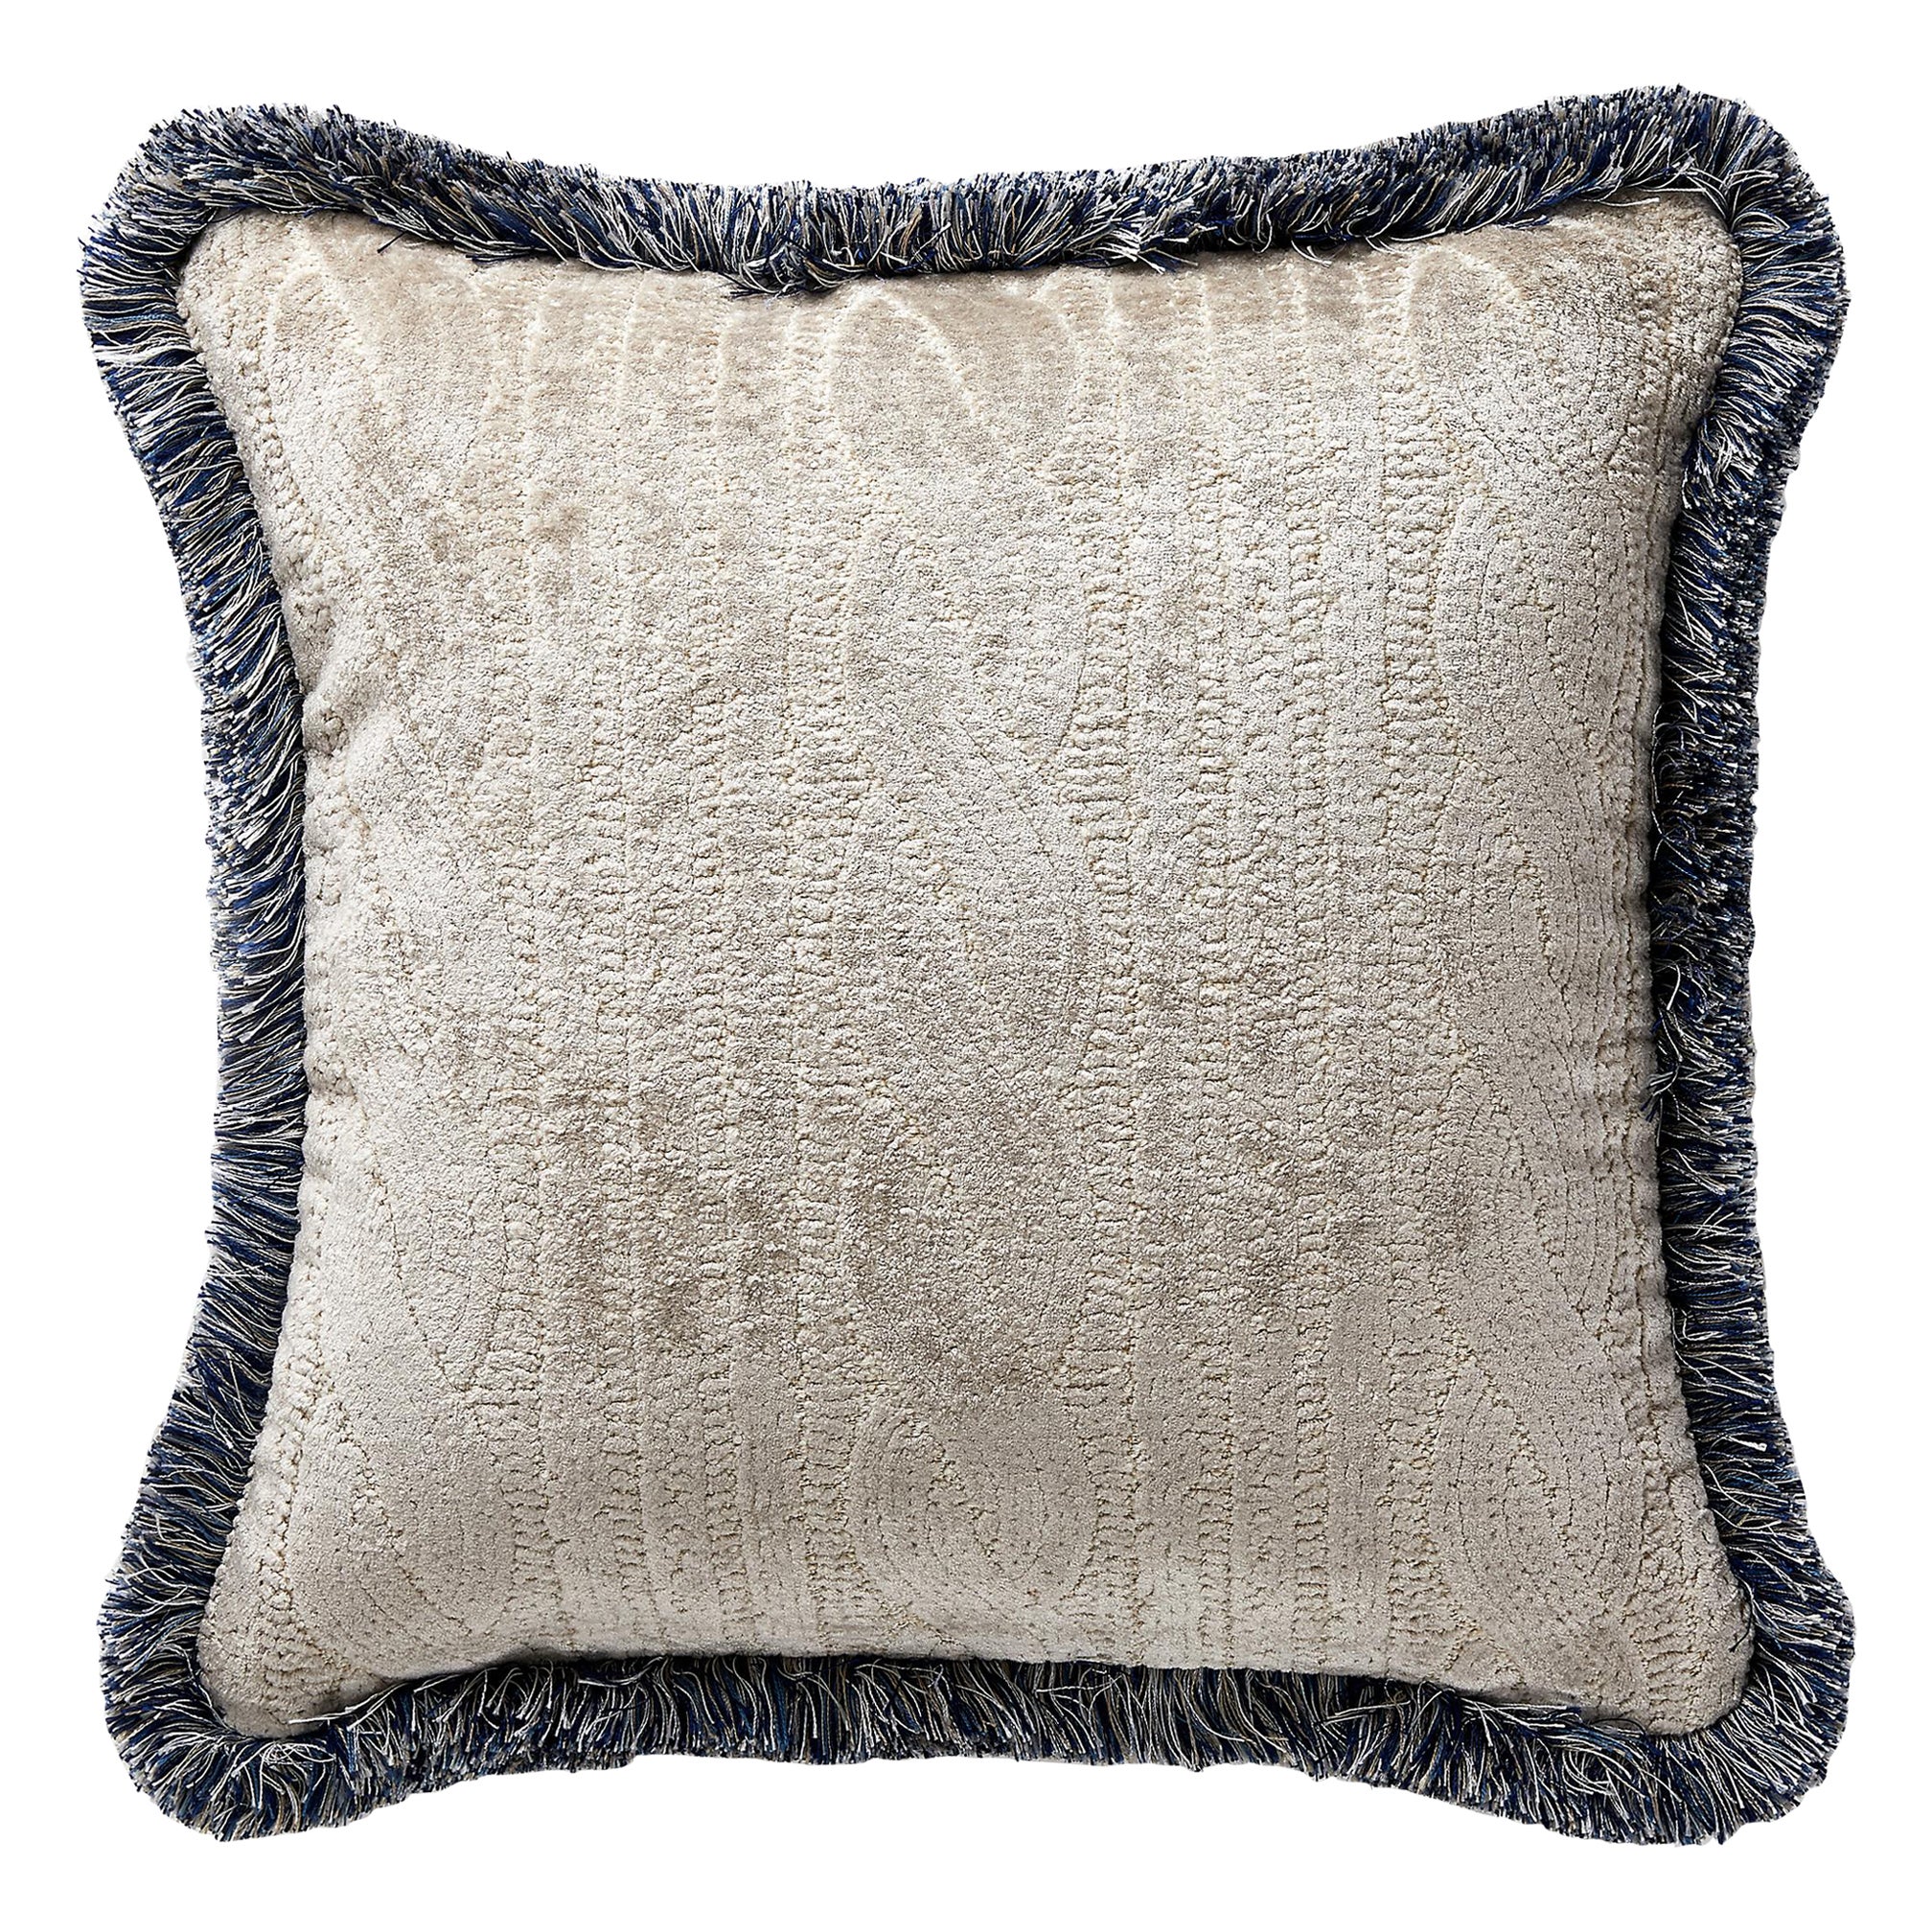 Sweater Pillow For Sale